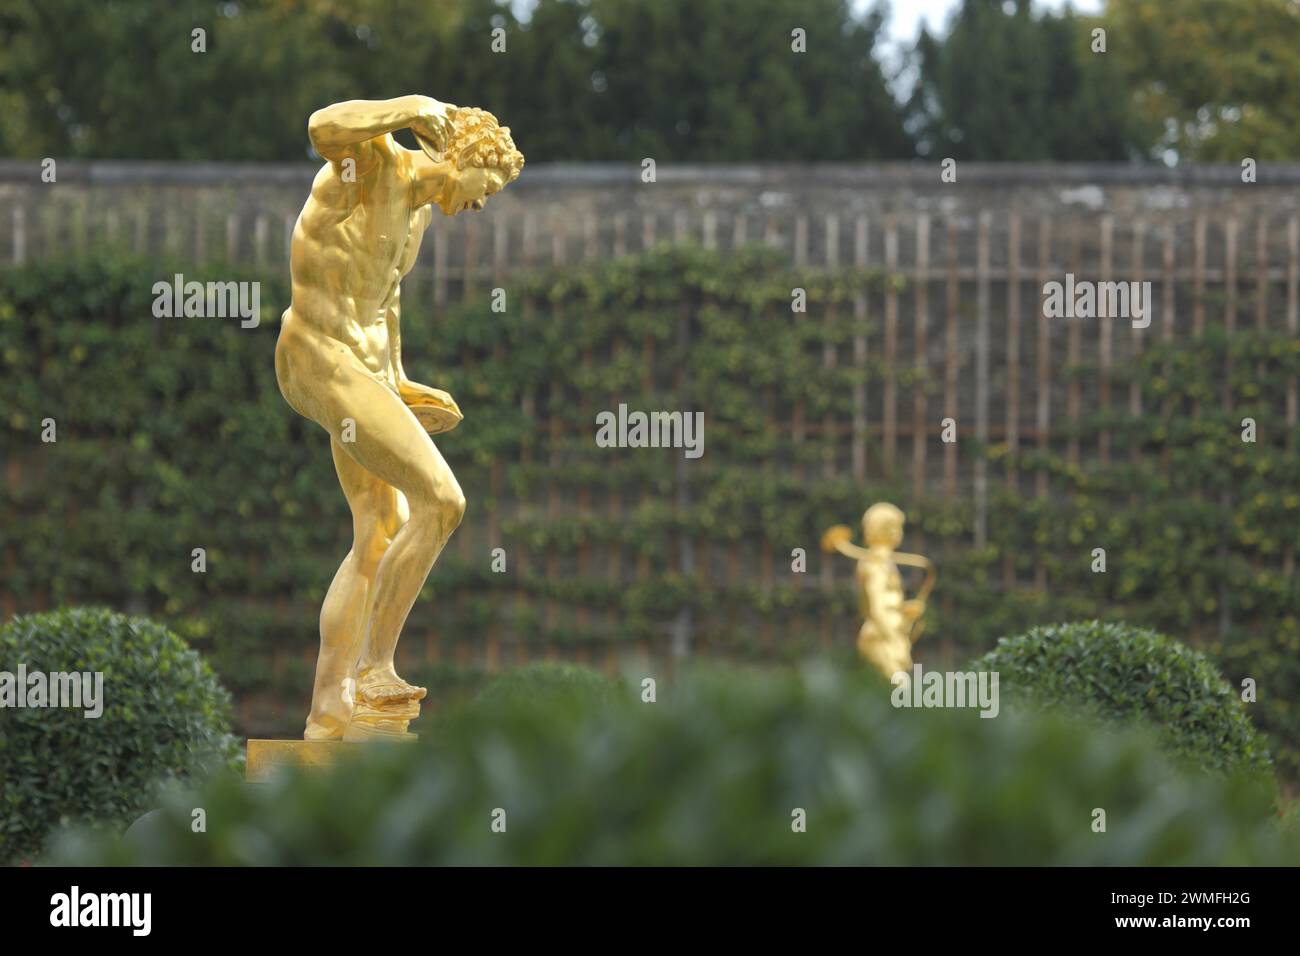 Satyr with cymbal as golden statue, sculpture, golden, cymbal player, shining, shining, orangery, castle garden, Weilburg, Taunus, Hesse, Germany Stock Photo